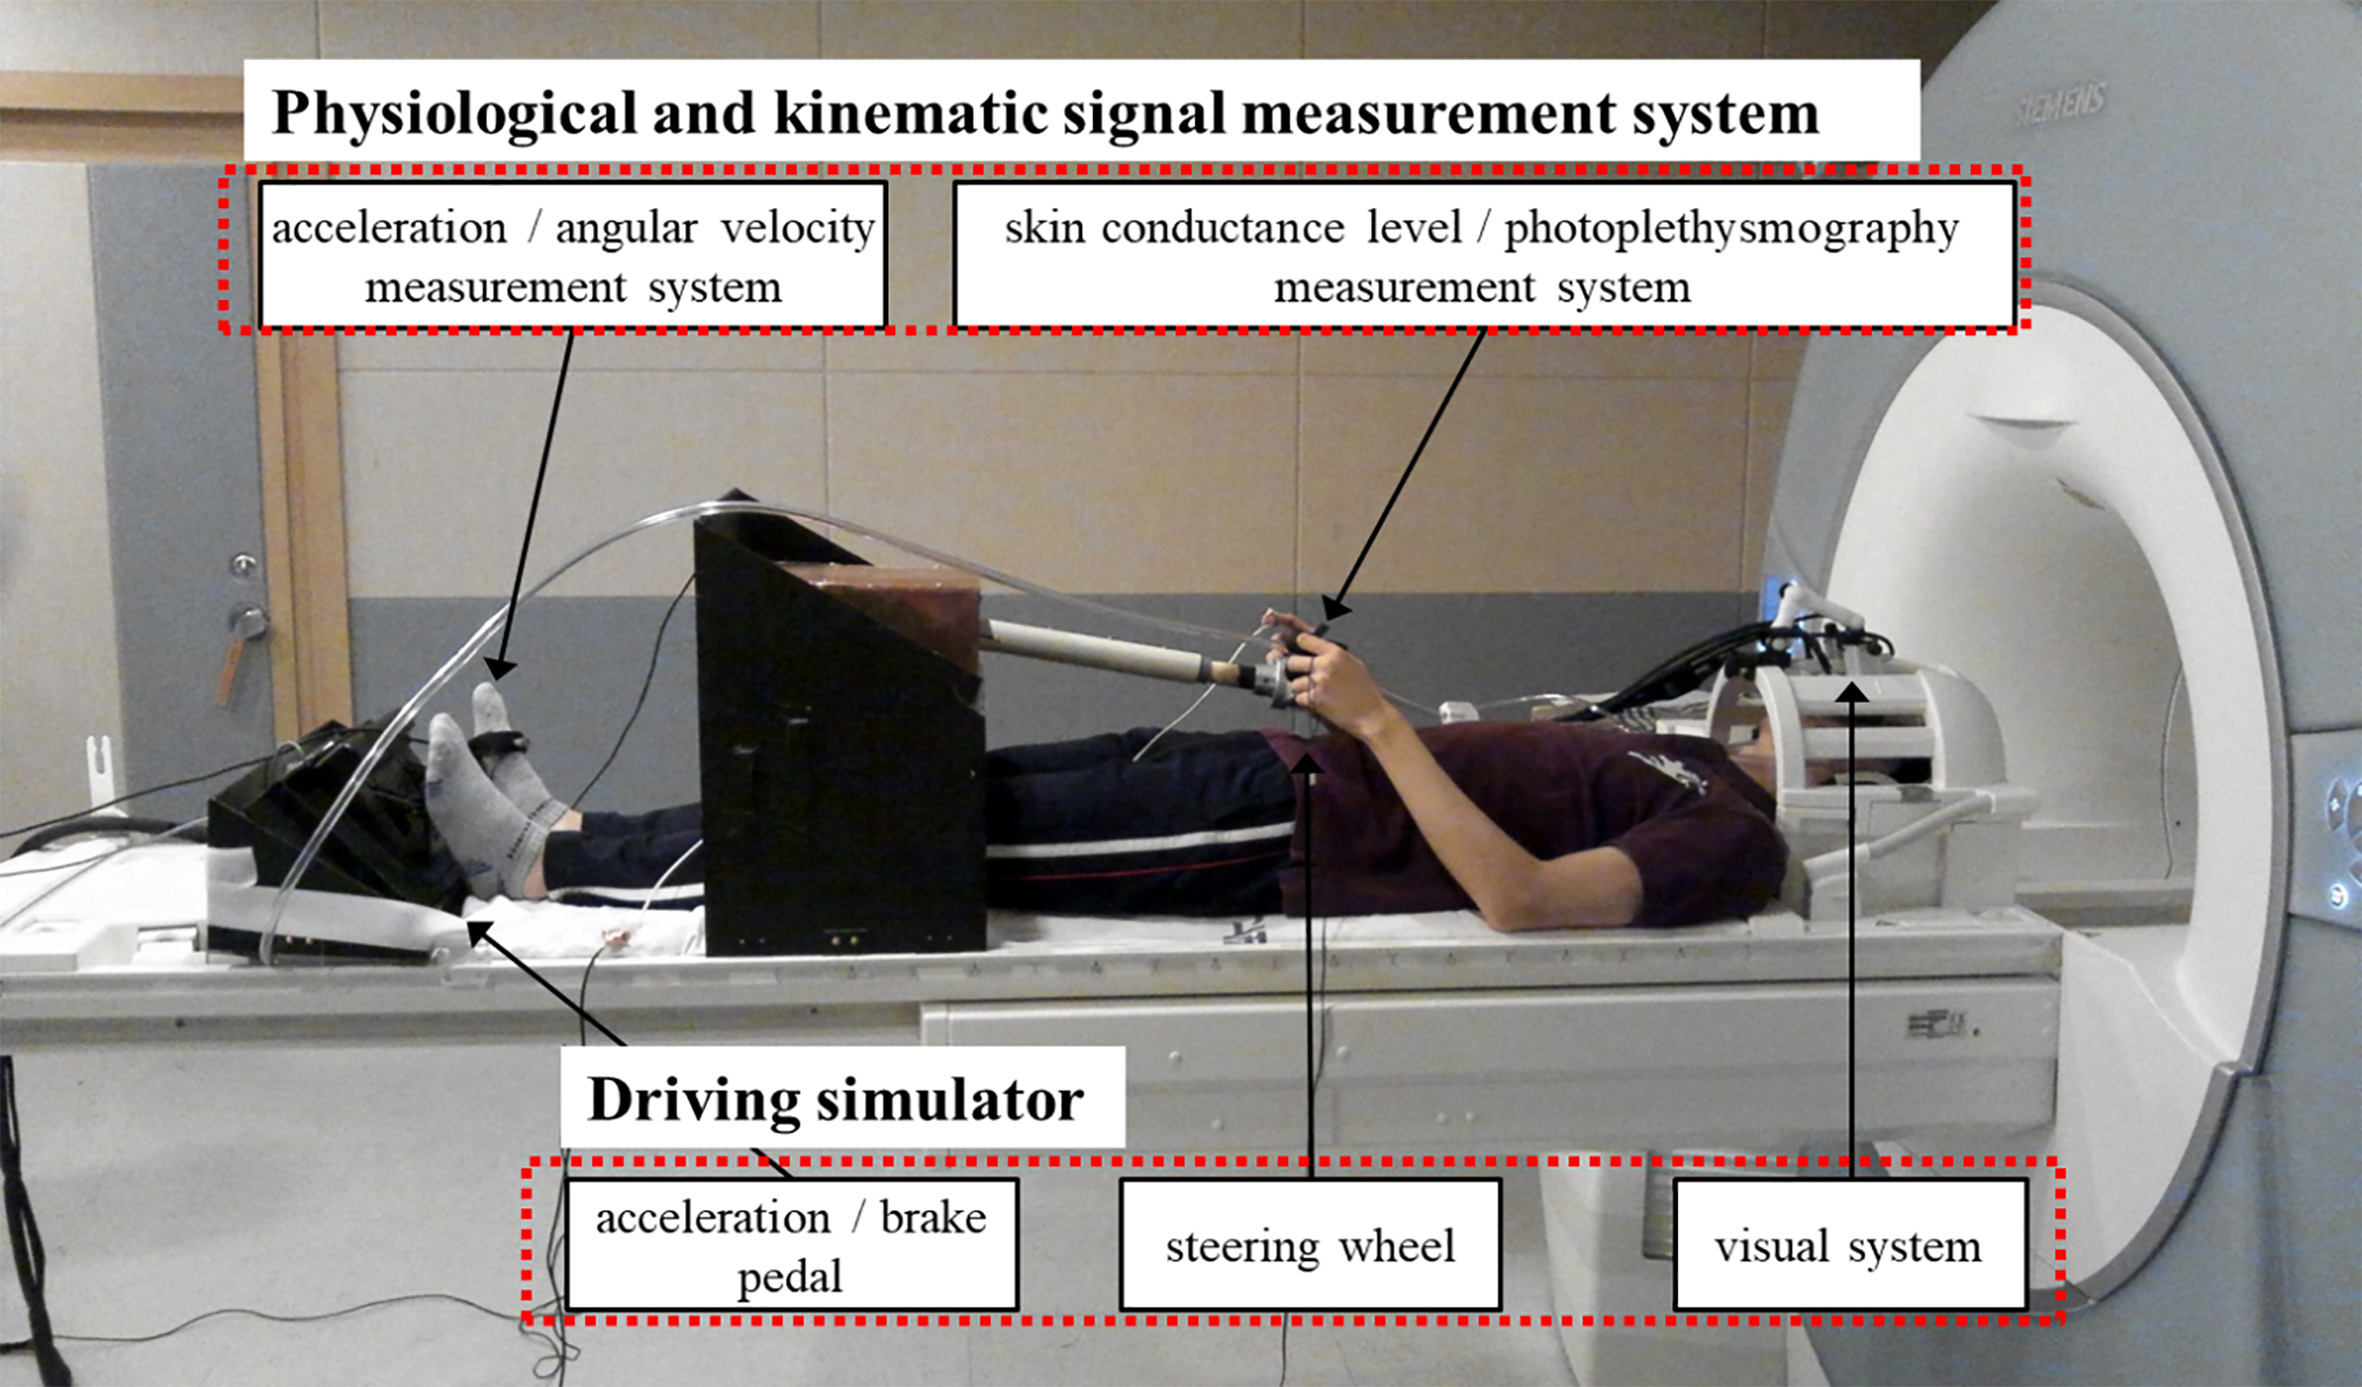 Overall structure of the multi-biosignal measurement system for driving.